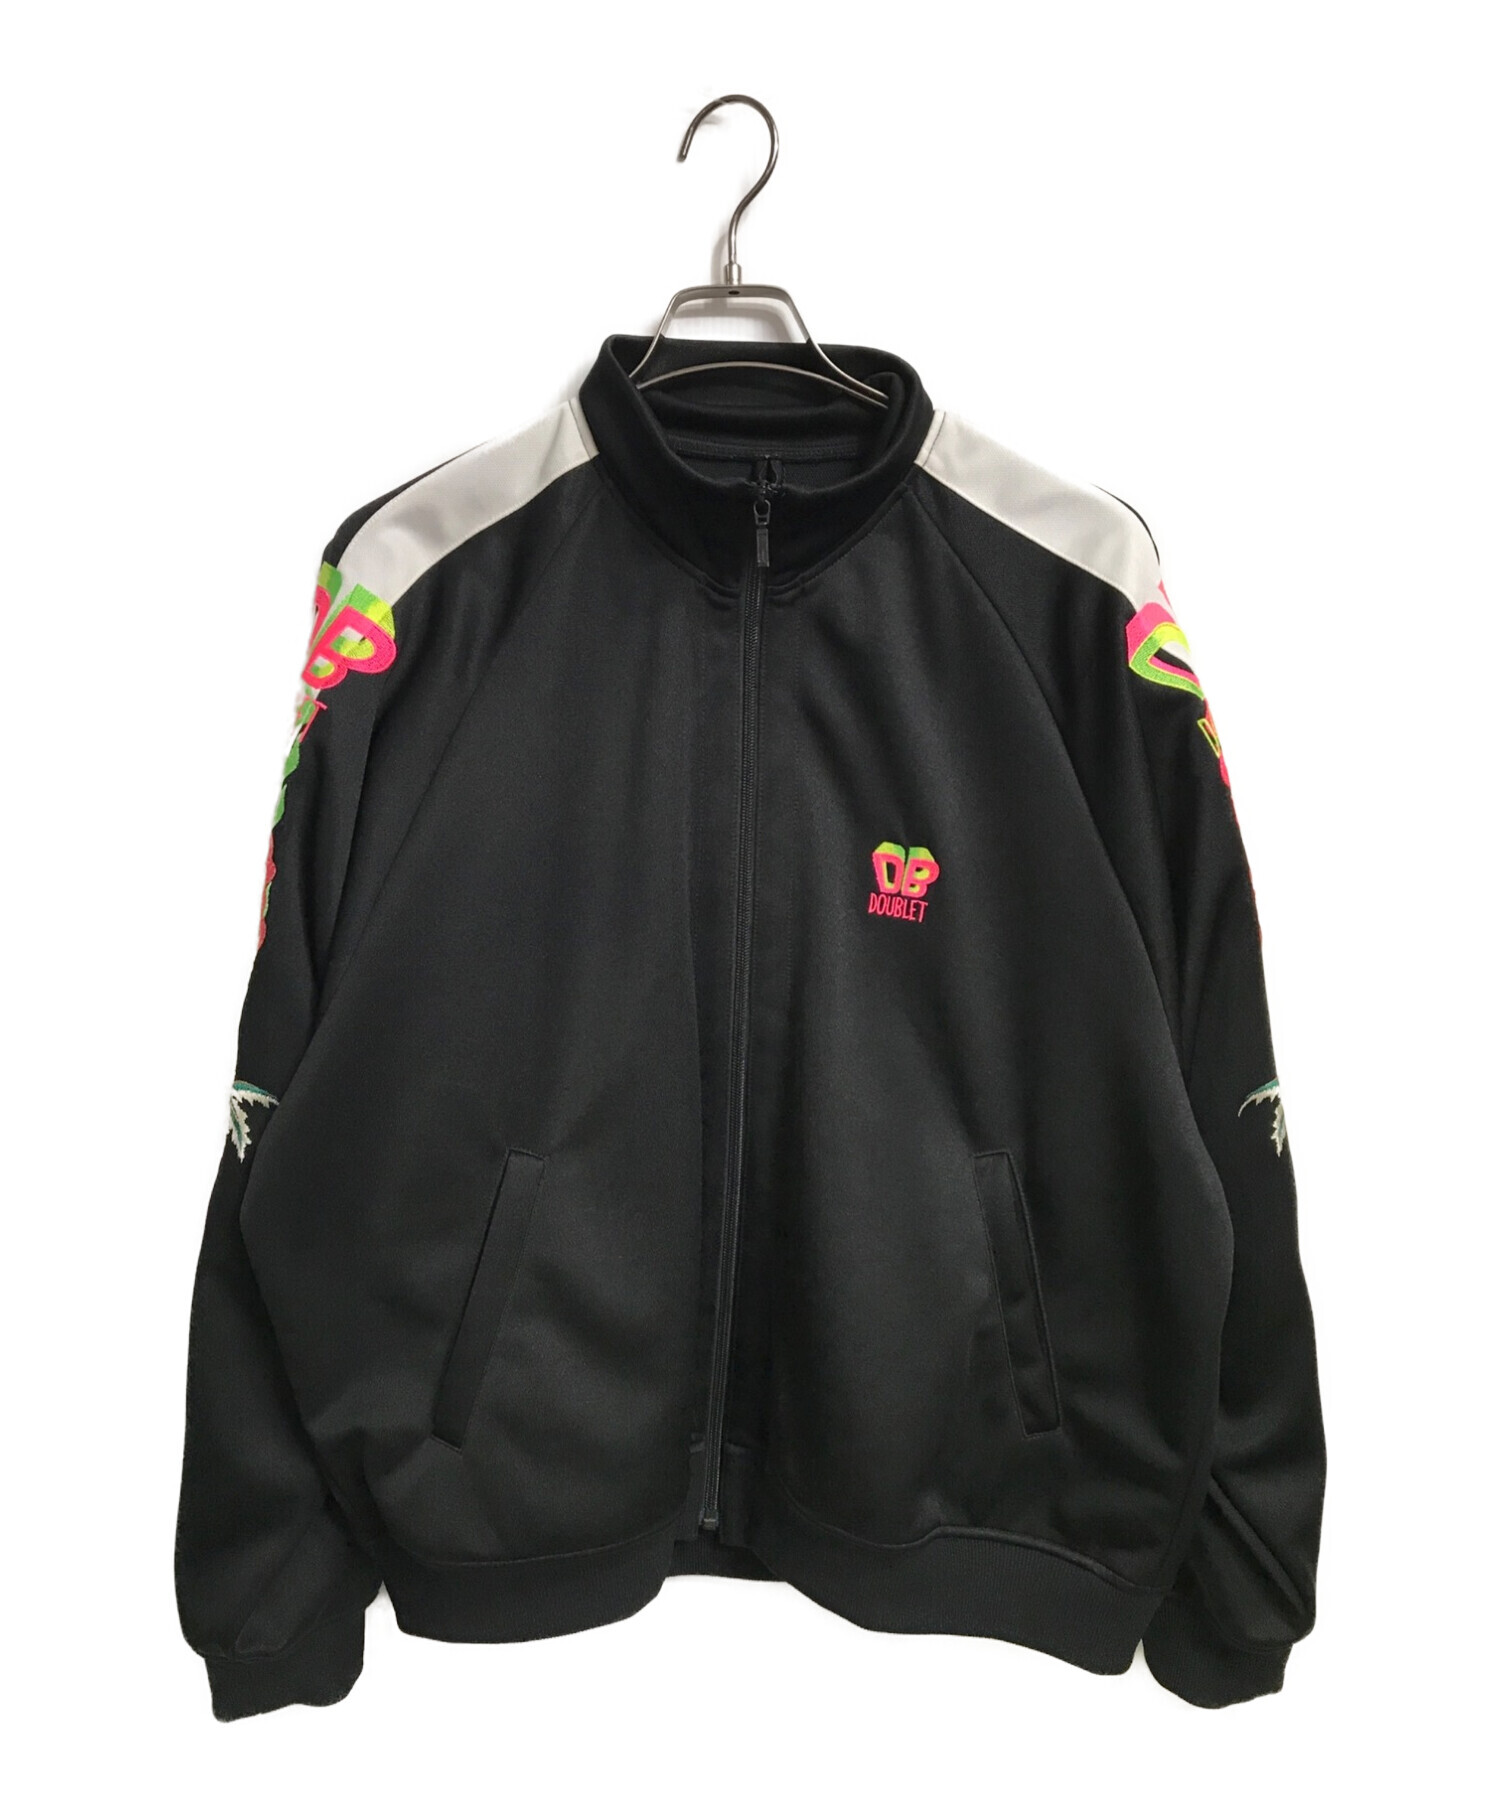 doublet (ダブレット) CHAOS EMBROIDERY TRACK JACKET ブラック サイズ:M